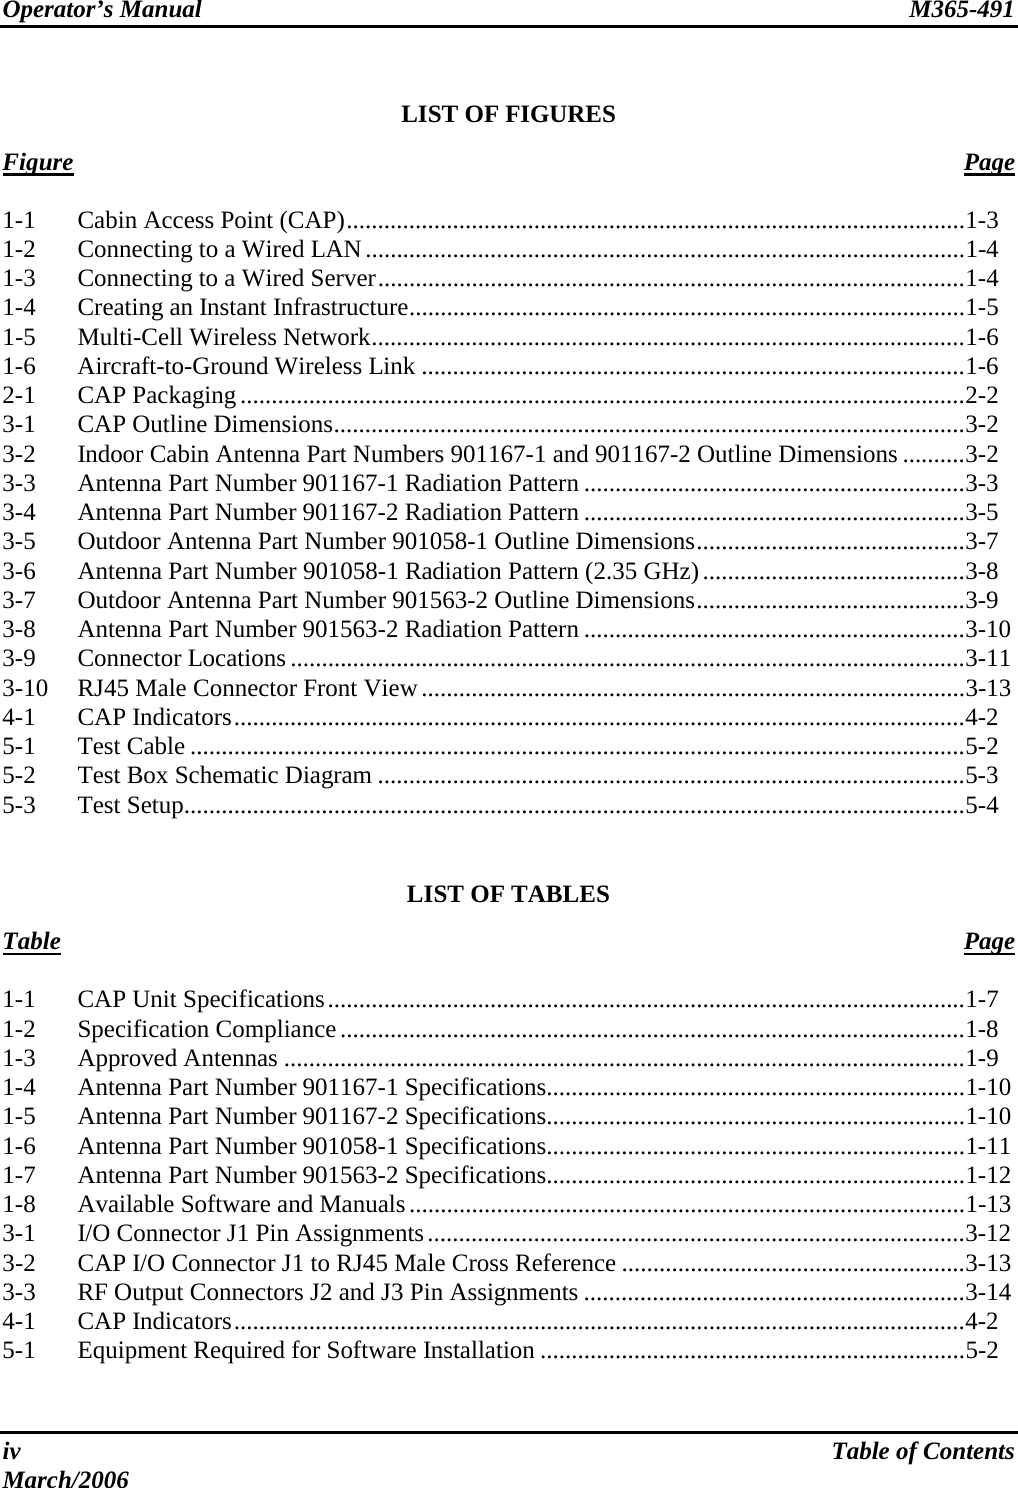 Operator’s Manual  M365-491   iv  Table of Contents March/2006  LIST OF FIGURES  Figure   Page  1-1  Cabin Access Point (CAP)...................................................................................................1-3 1-2  Connecting to a Wired LAN ................................................................................................1-4 1-3  Connecting to a Wired Server..............................................................................................1-4 1-4  Creating an Instant Infrastructure.........................................................................................1-5 1-5 Multi-Cell Wireless Network...............................................................................................1-6 1-6 Aircraft-to-Ground Wireless Link .......................................................................................1-6 2-1 CAP Packaging....................................................................................................................2-2 3-1  CAP Outline Dimensions.....................................................................................................3-2 3-2  Indoor Cabin Antenna Part Numbers 901167-1 and 901167-2 Outline Dimensions ..........3-2 3-3  Antenna Part Number 901167-1 Radiation Pattern .............................................................3-3 3-4  Antenna Part Number 901167-2 Radiation Pattern .............................................................3-5 3-5  Outdoor Antenna Part Number 901058-1 Outline Dimensions...........................................3-7 3-6  Antenna Part Number 901058-1 Radiation Pattern (2.35 GHz)..........................................3-8 3-7  Outdoor Antenna Part Number 901563-2 Outline Dimensions...........................................3-9 3-8  Antenna Part Number 901563-2 Radiation Pattern .............................................................3-10 3-9 Connector Locations ............................................................................................................3-11 3-10  RJ45 Male Connector Front View.......................................................................................3-13 4-1 CAP Indicators.....................................................................................................................4-2 5-1 Test Cable ............................................................................................................................5-2 5-2  Test Box Schematic Diagram ..............................................................................................5-3 5-3 Test Setup.............................................................................................................................5-4   LIST OF TABLES  Table Page  1-1  CAP Unit Specifications......................................................................................................1-7 1-2 Specification Compliance....................................................................................................1-8 1-3 Approved Antennas .............................................................................................................1-9 1-4  Antenna Part Number 901167-1 Specifications...................................................................1-10 1-5  Antenna Part Number 901167-2 Specifications...................................................................1-10 1-6  Antenna Part Number 901058-1 Specifications...................................................................1-11 1-7  Antenna Part Number 901563-2 Specifications...................................................................1-12 1-8 Available Software and Manuals.........................................................................................1-13 3-1  I/O Connector J1 Pin Assignments......................................................................................3-12 3-2  CAP I/O Connector J1 to RJ45 Male Cross Reference .......................................................3-13 3-3  RF Output Connectors J2 and J3 Pin Assignments .............................................................3-14 4-1 CAP Indicators.....................................................................................................................4-2 5-1  Equipment Required for Software Installation ....................................................................5-2 